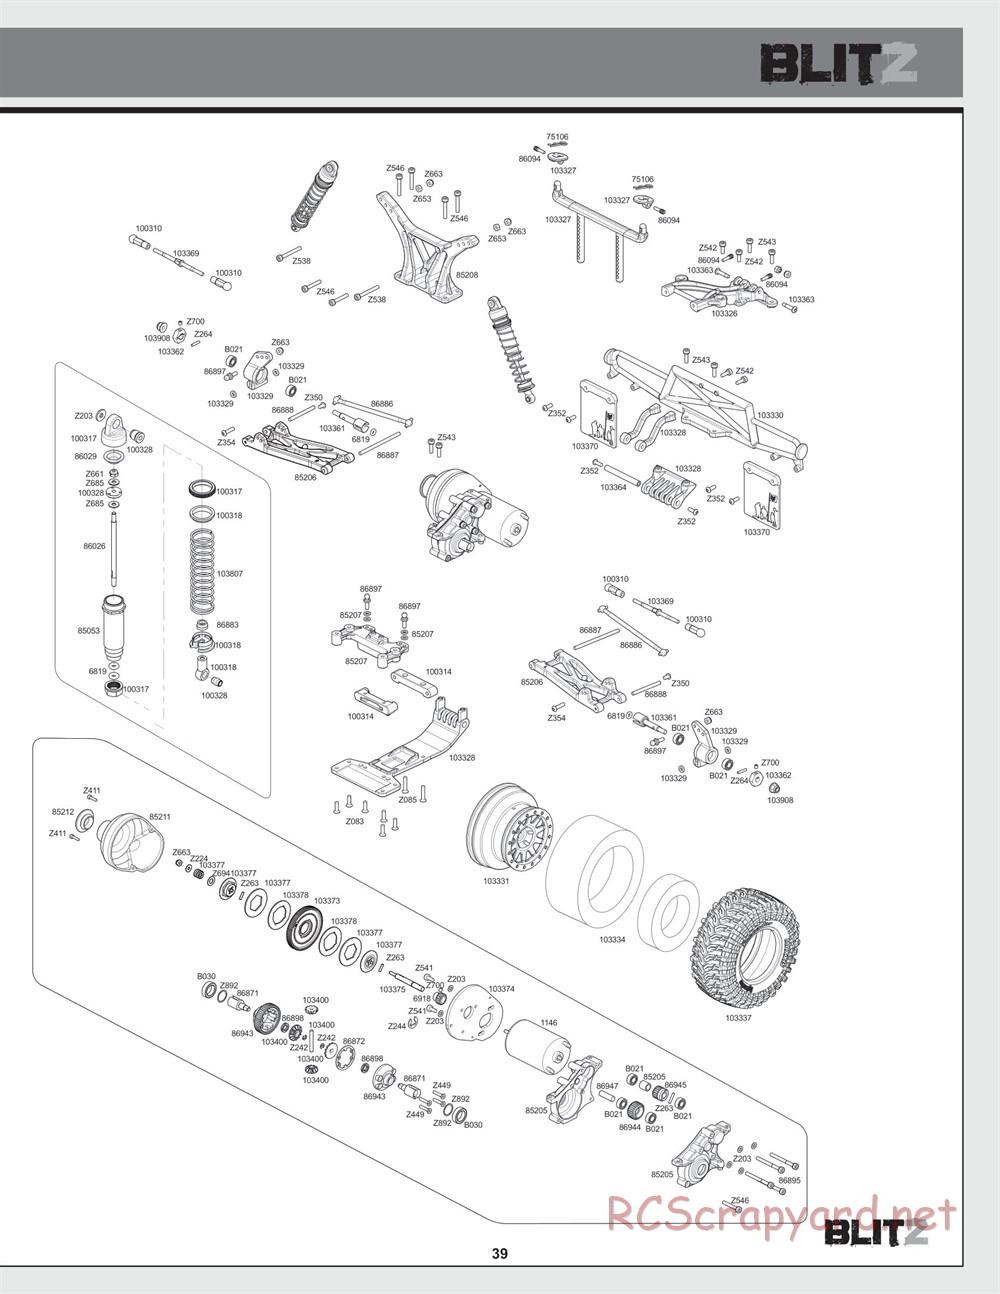 HPI - Blitz - Exploded View - Page 39